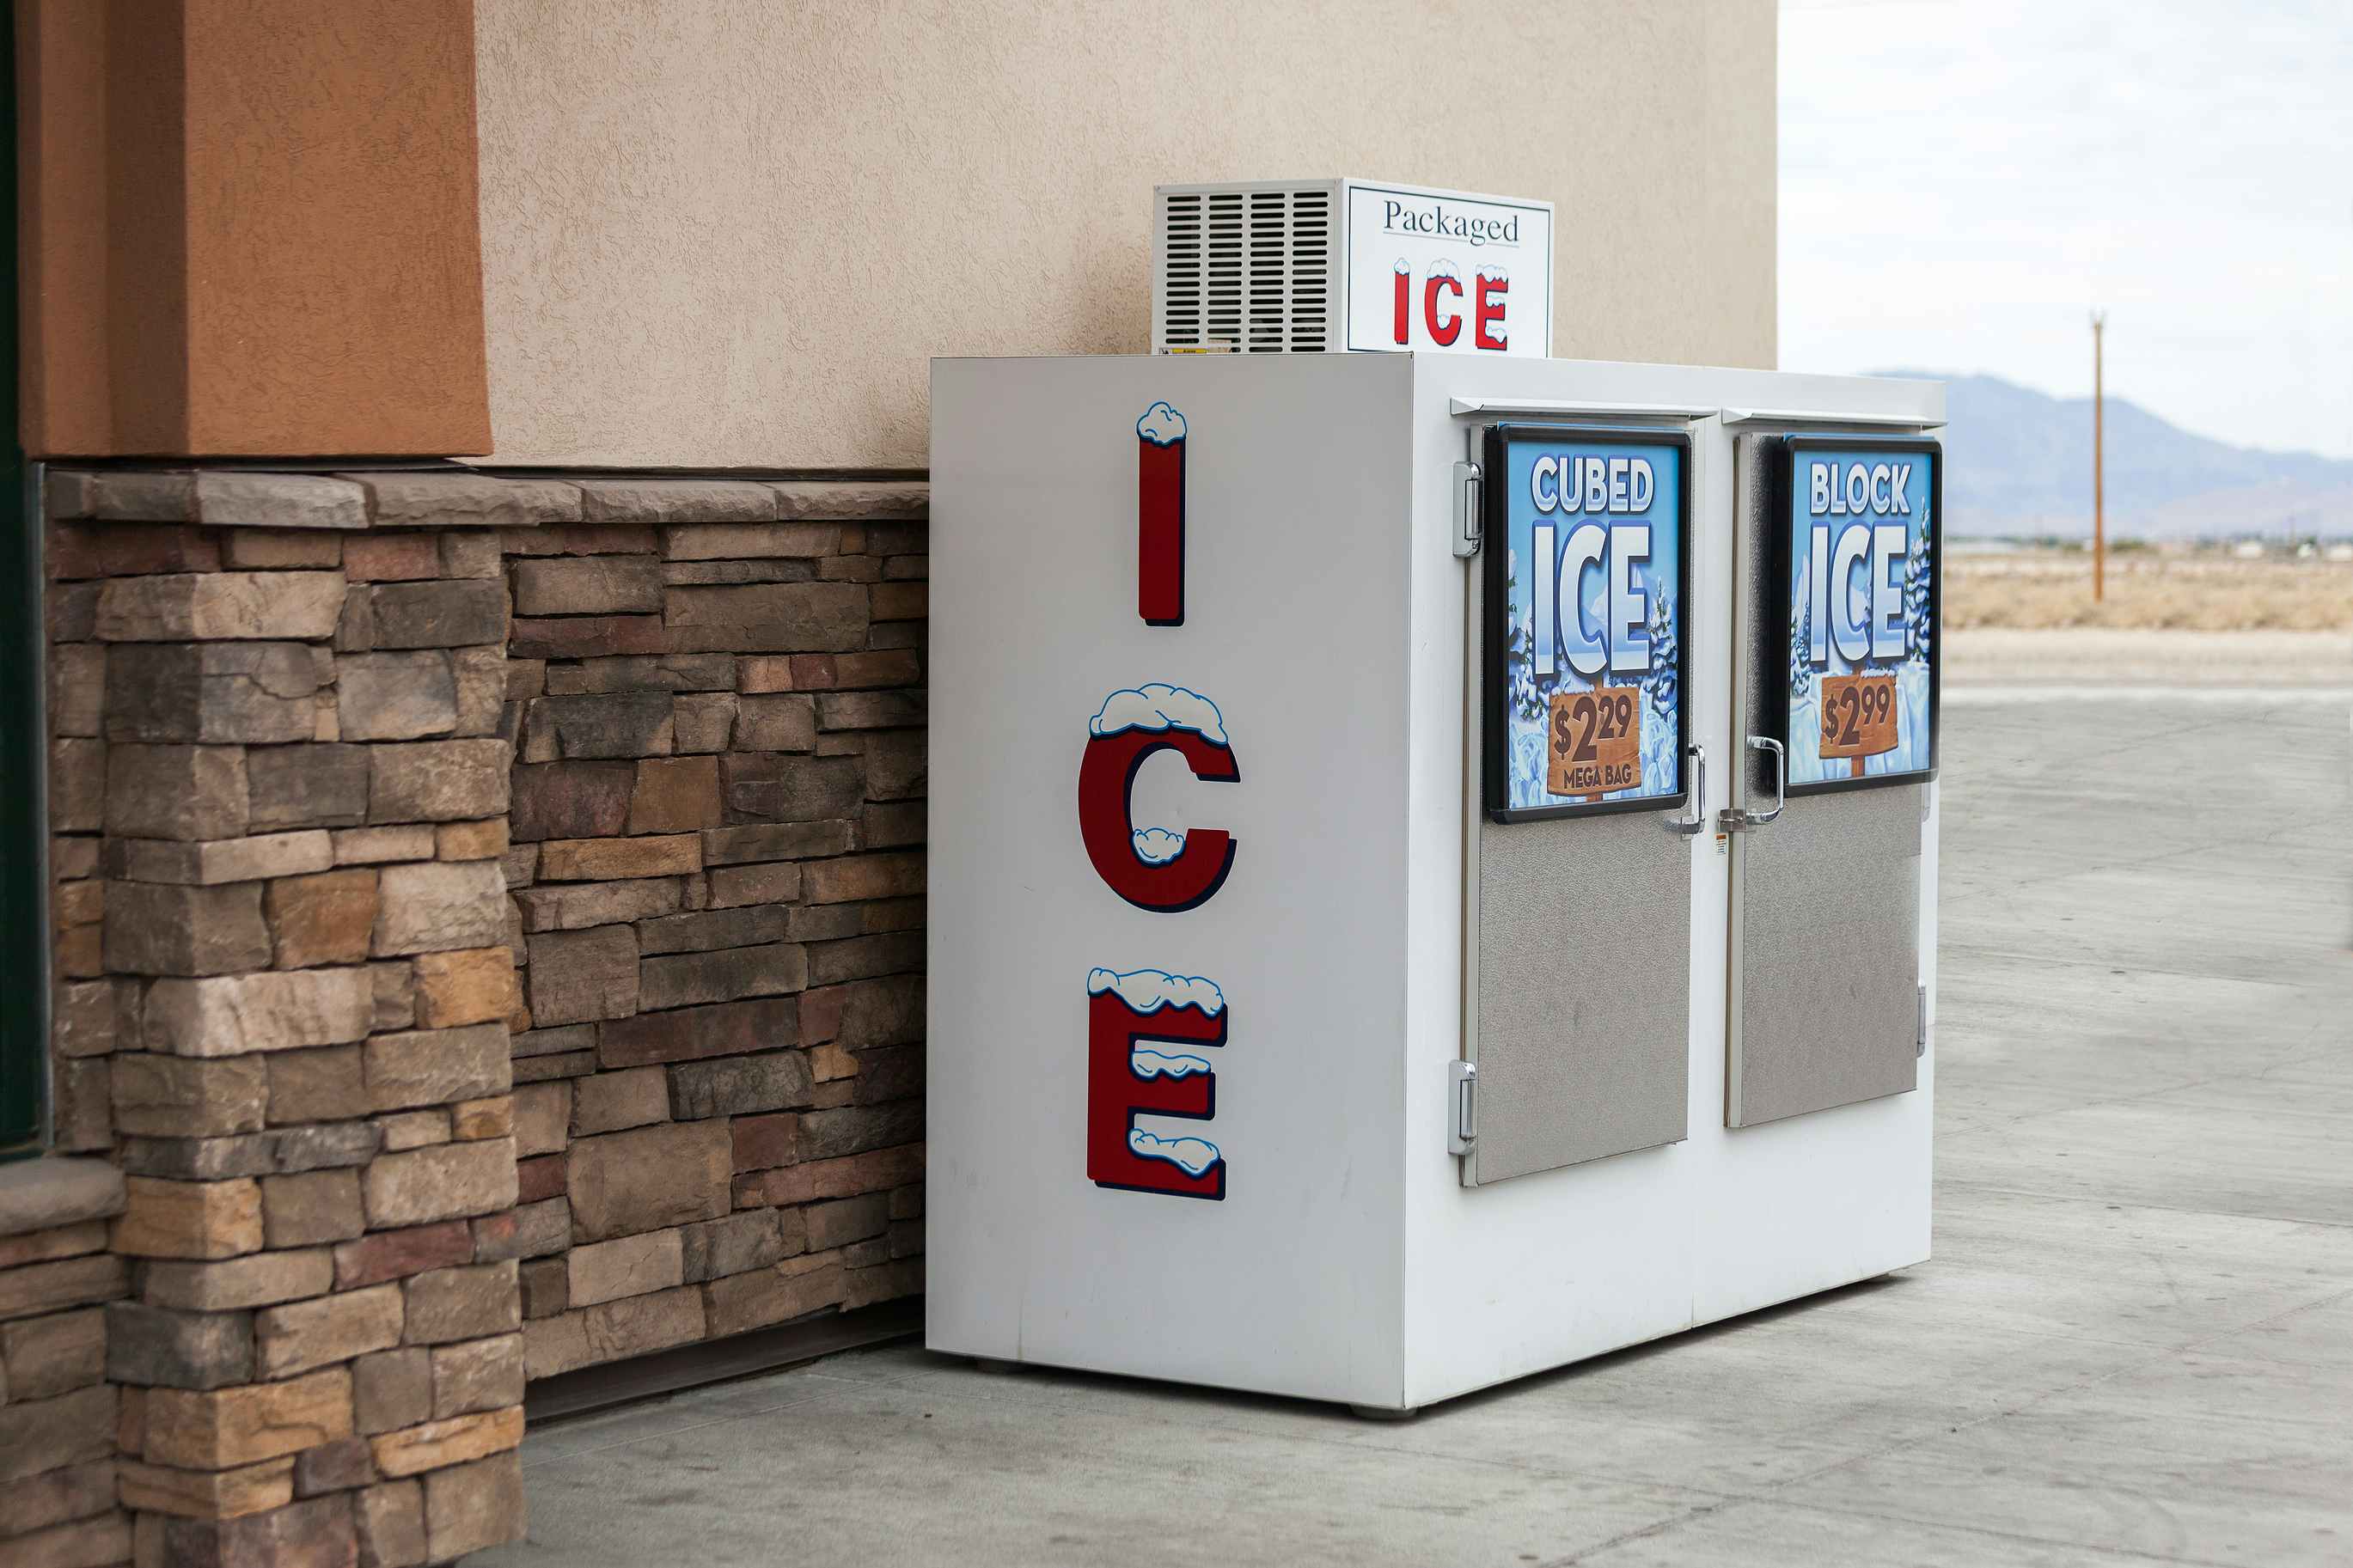 Photo of an ice machine outside a grocery store, with a sign reflecting a "Mega Bag" price of $2.29.